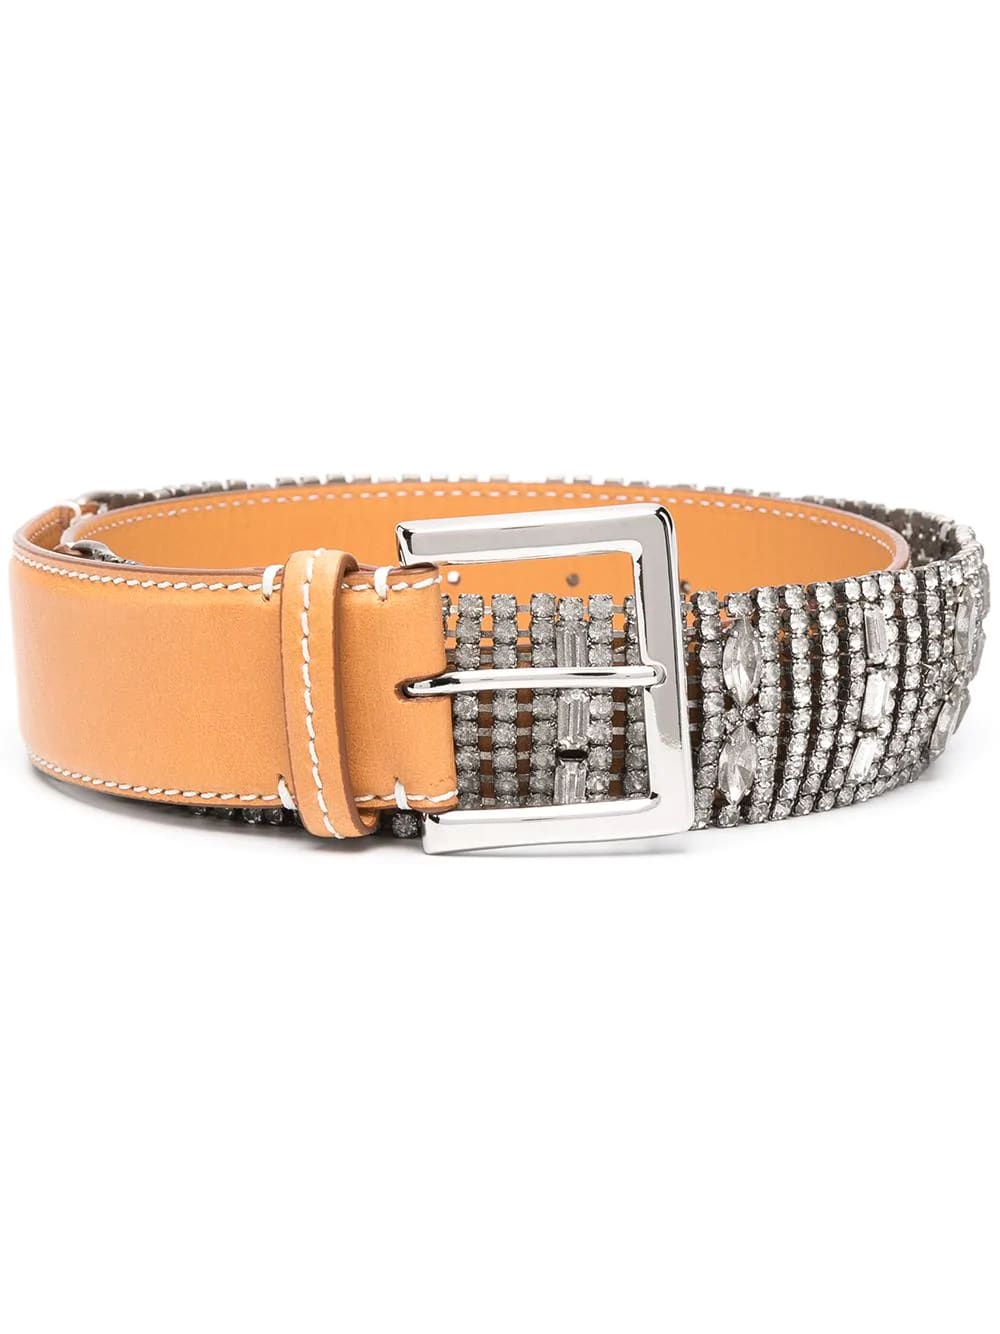 Ermanno Scervino Woman Belt With Jewel Application